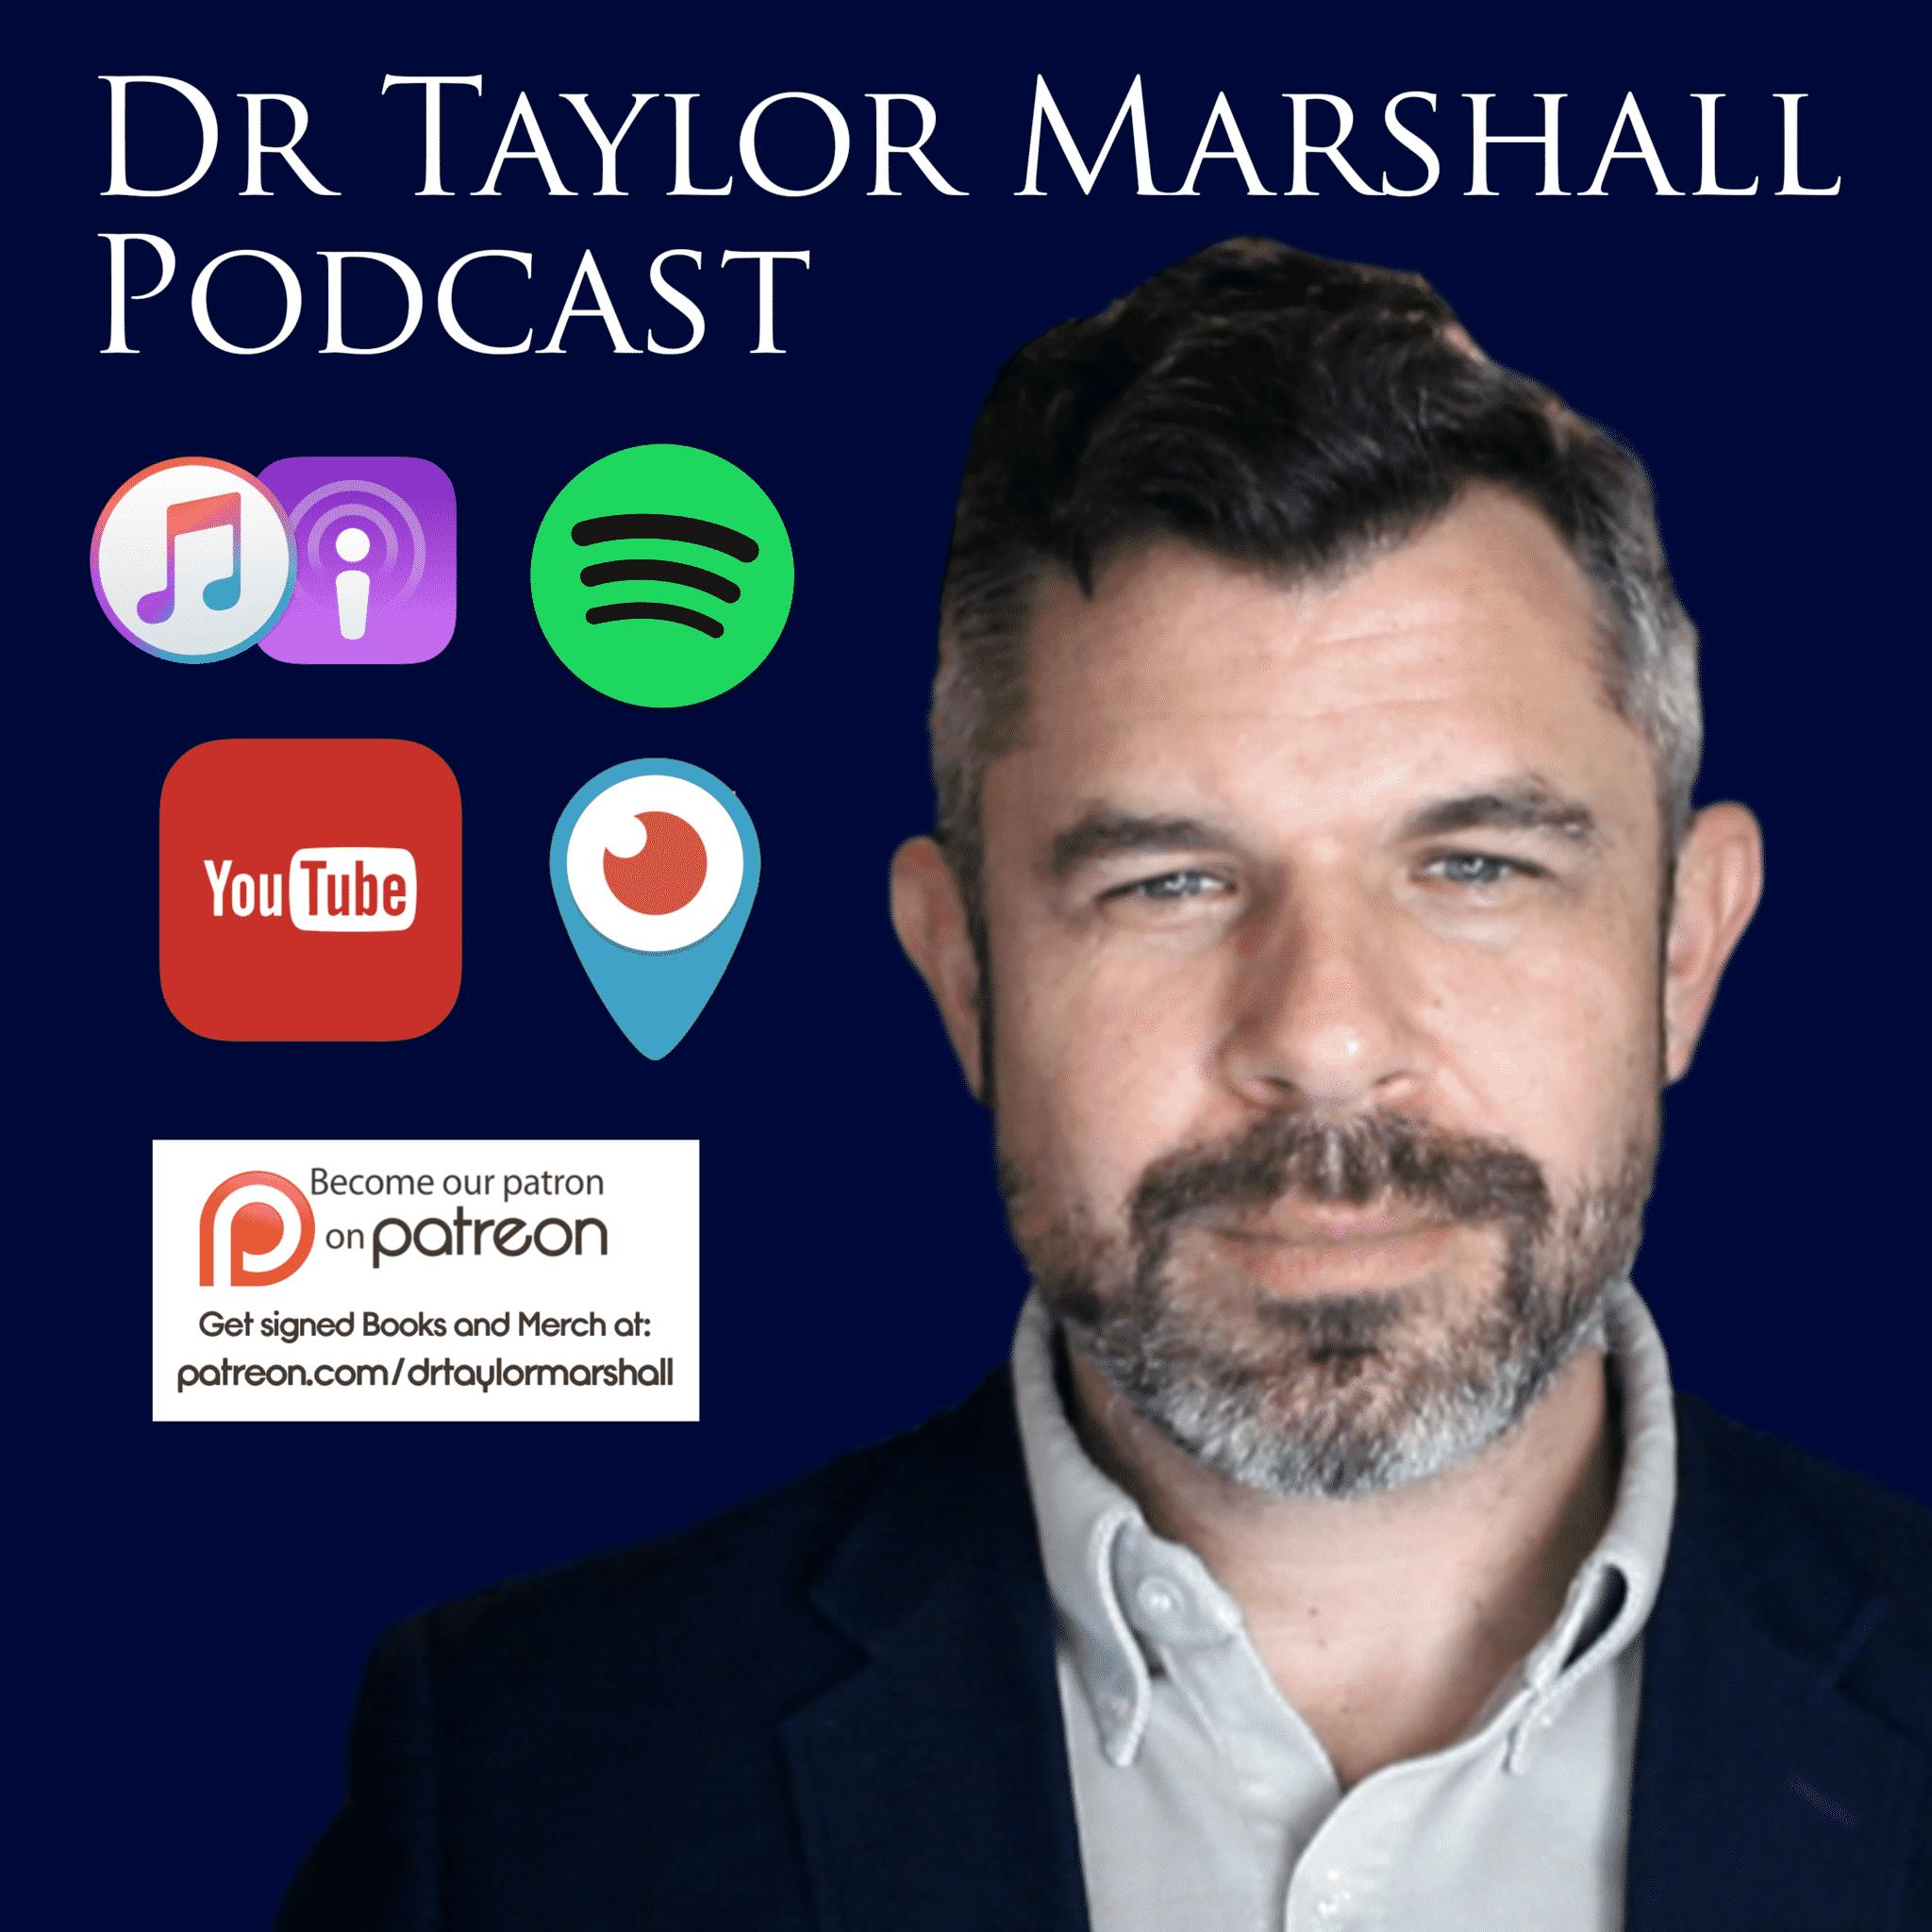 1000: Dr. Taylor Marshall’s Presidential